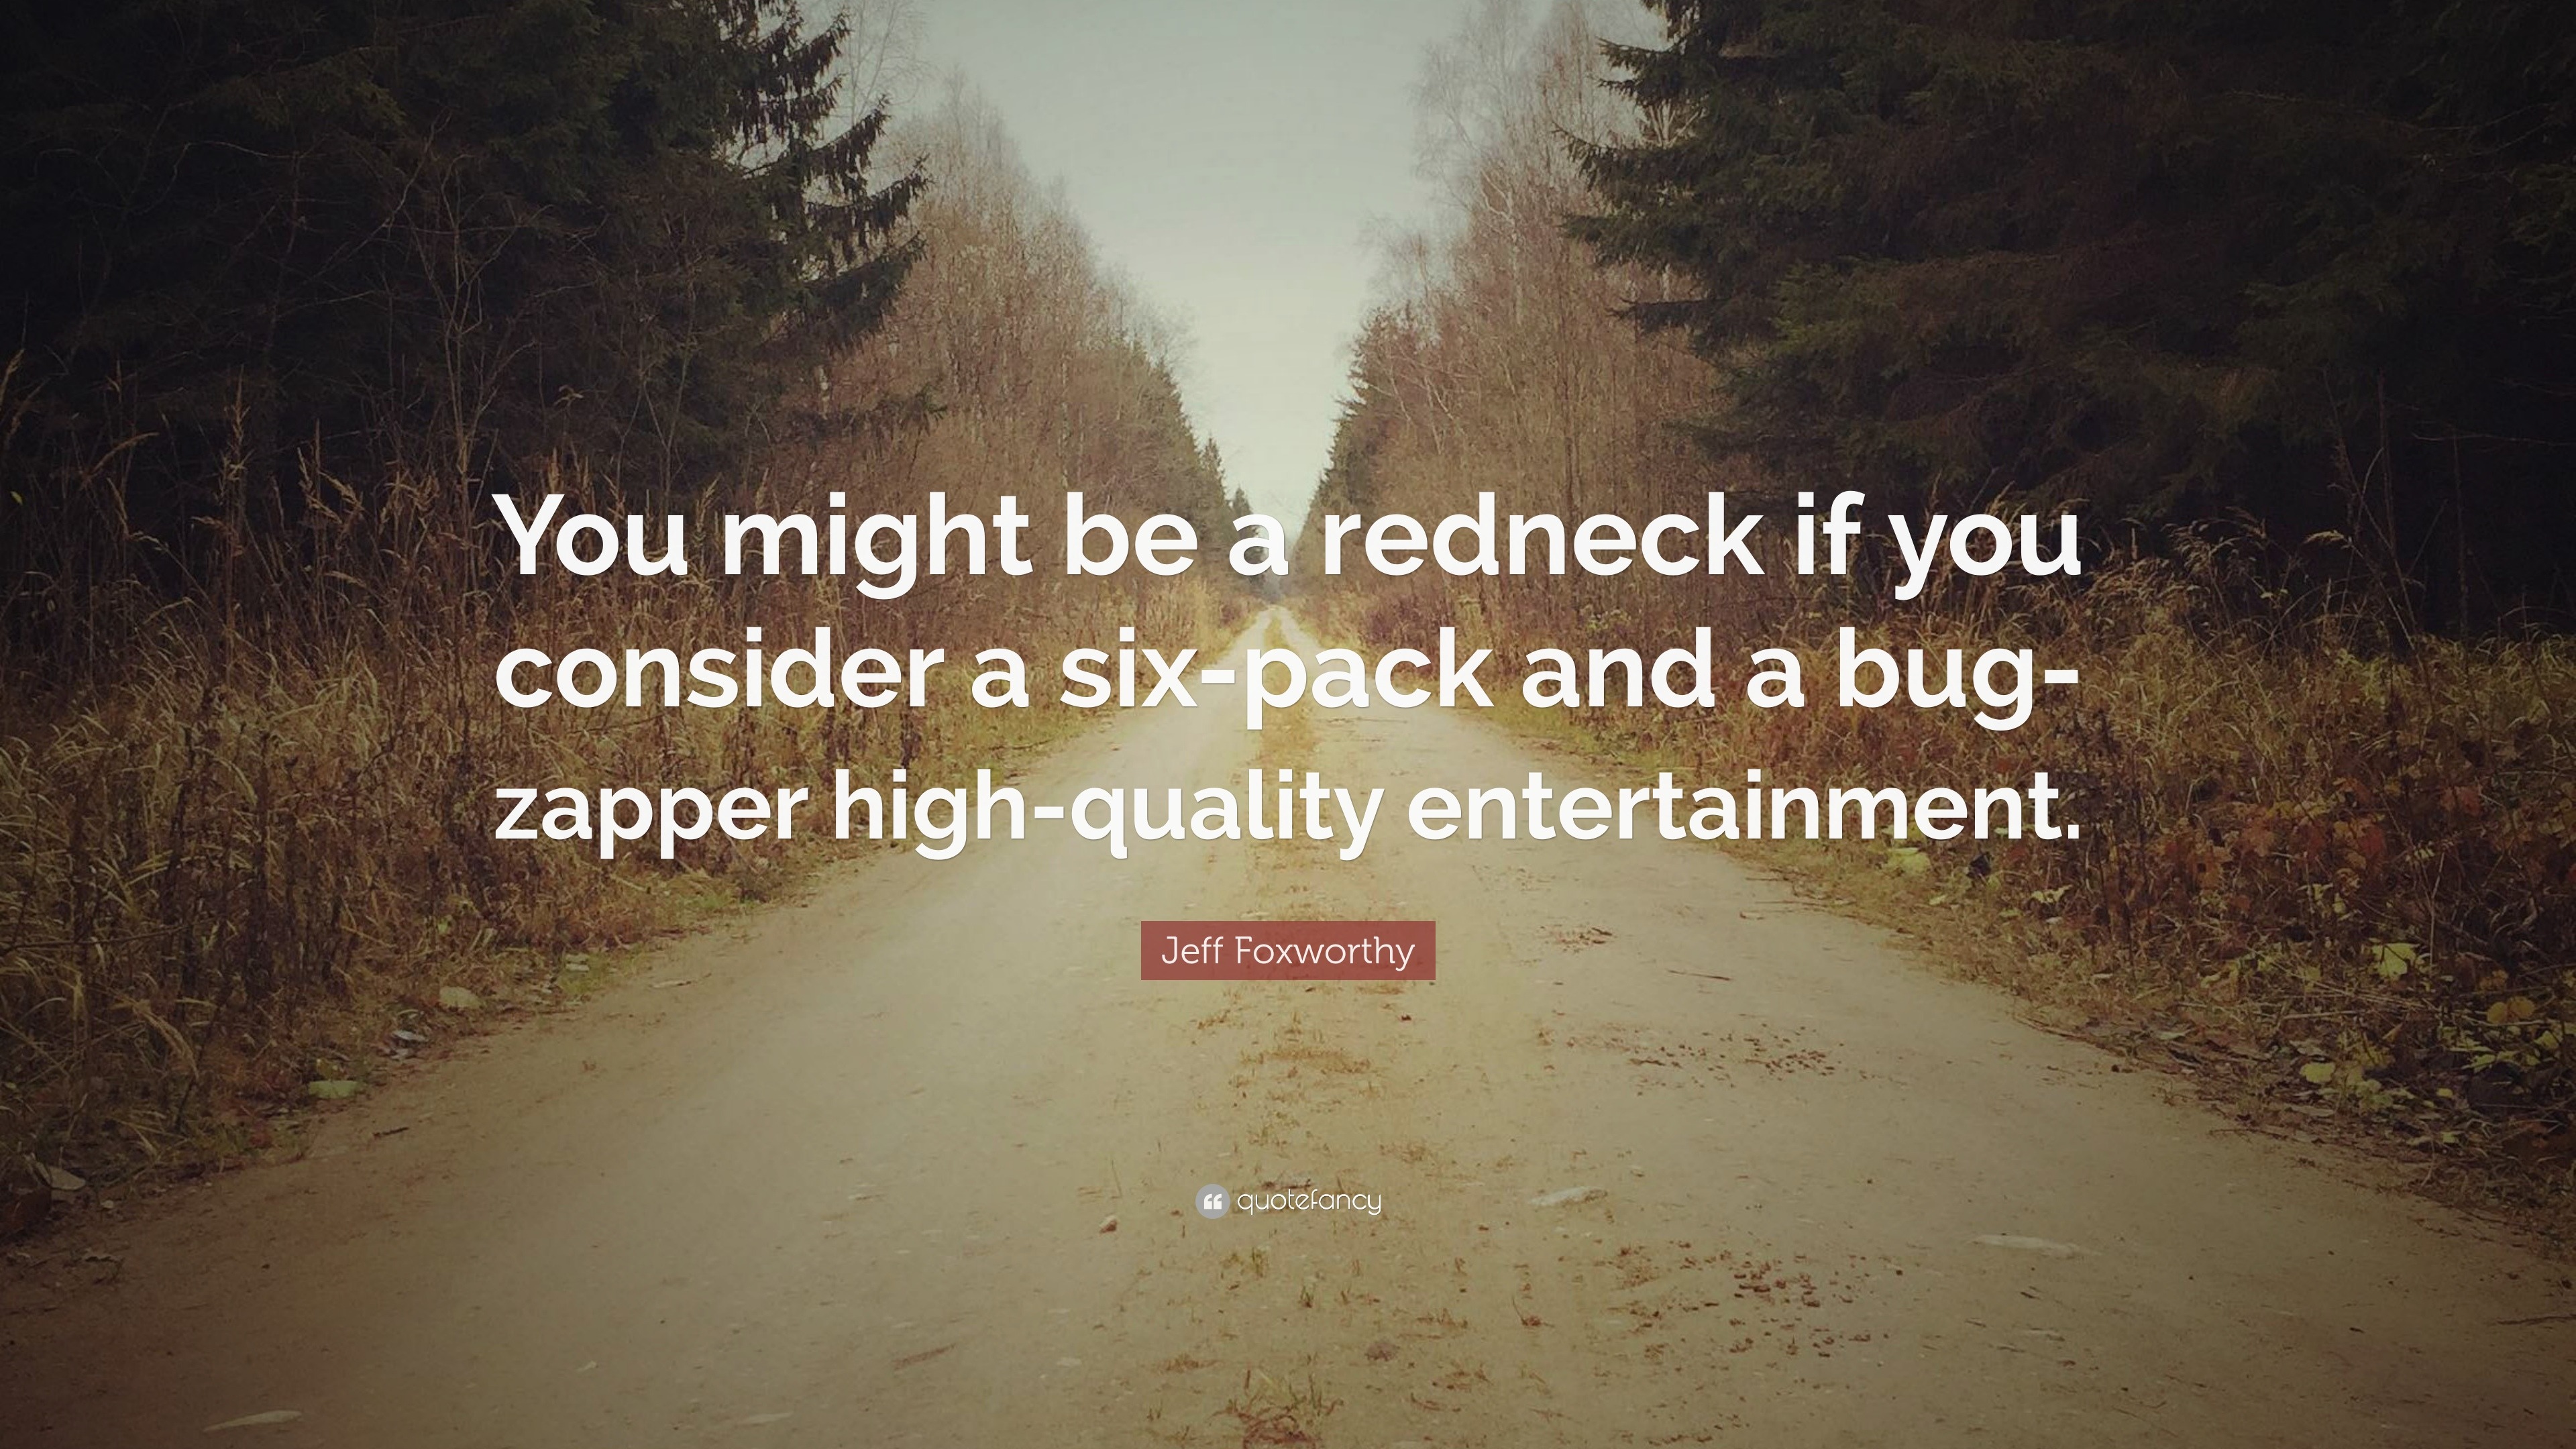 Jeff Foxworthy Quote: "You might be a redneck if you consider a six-pack and a bug-zapper high ...